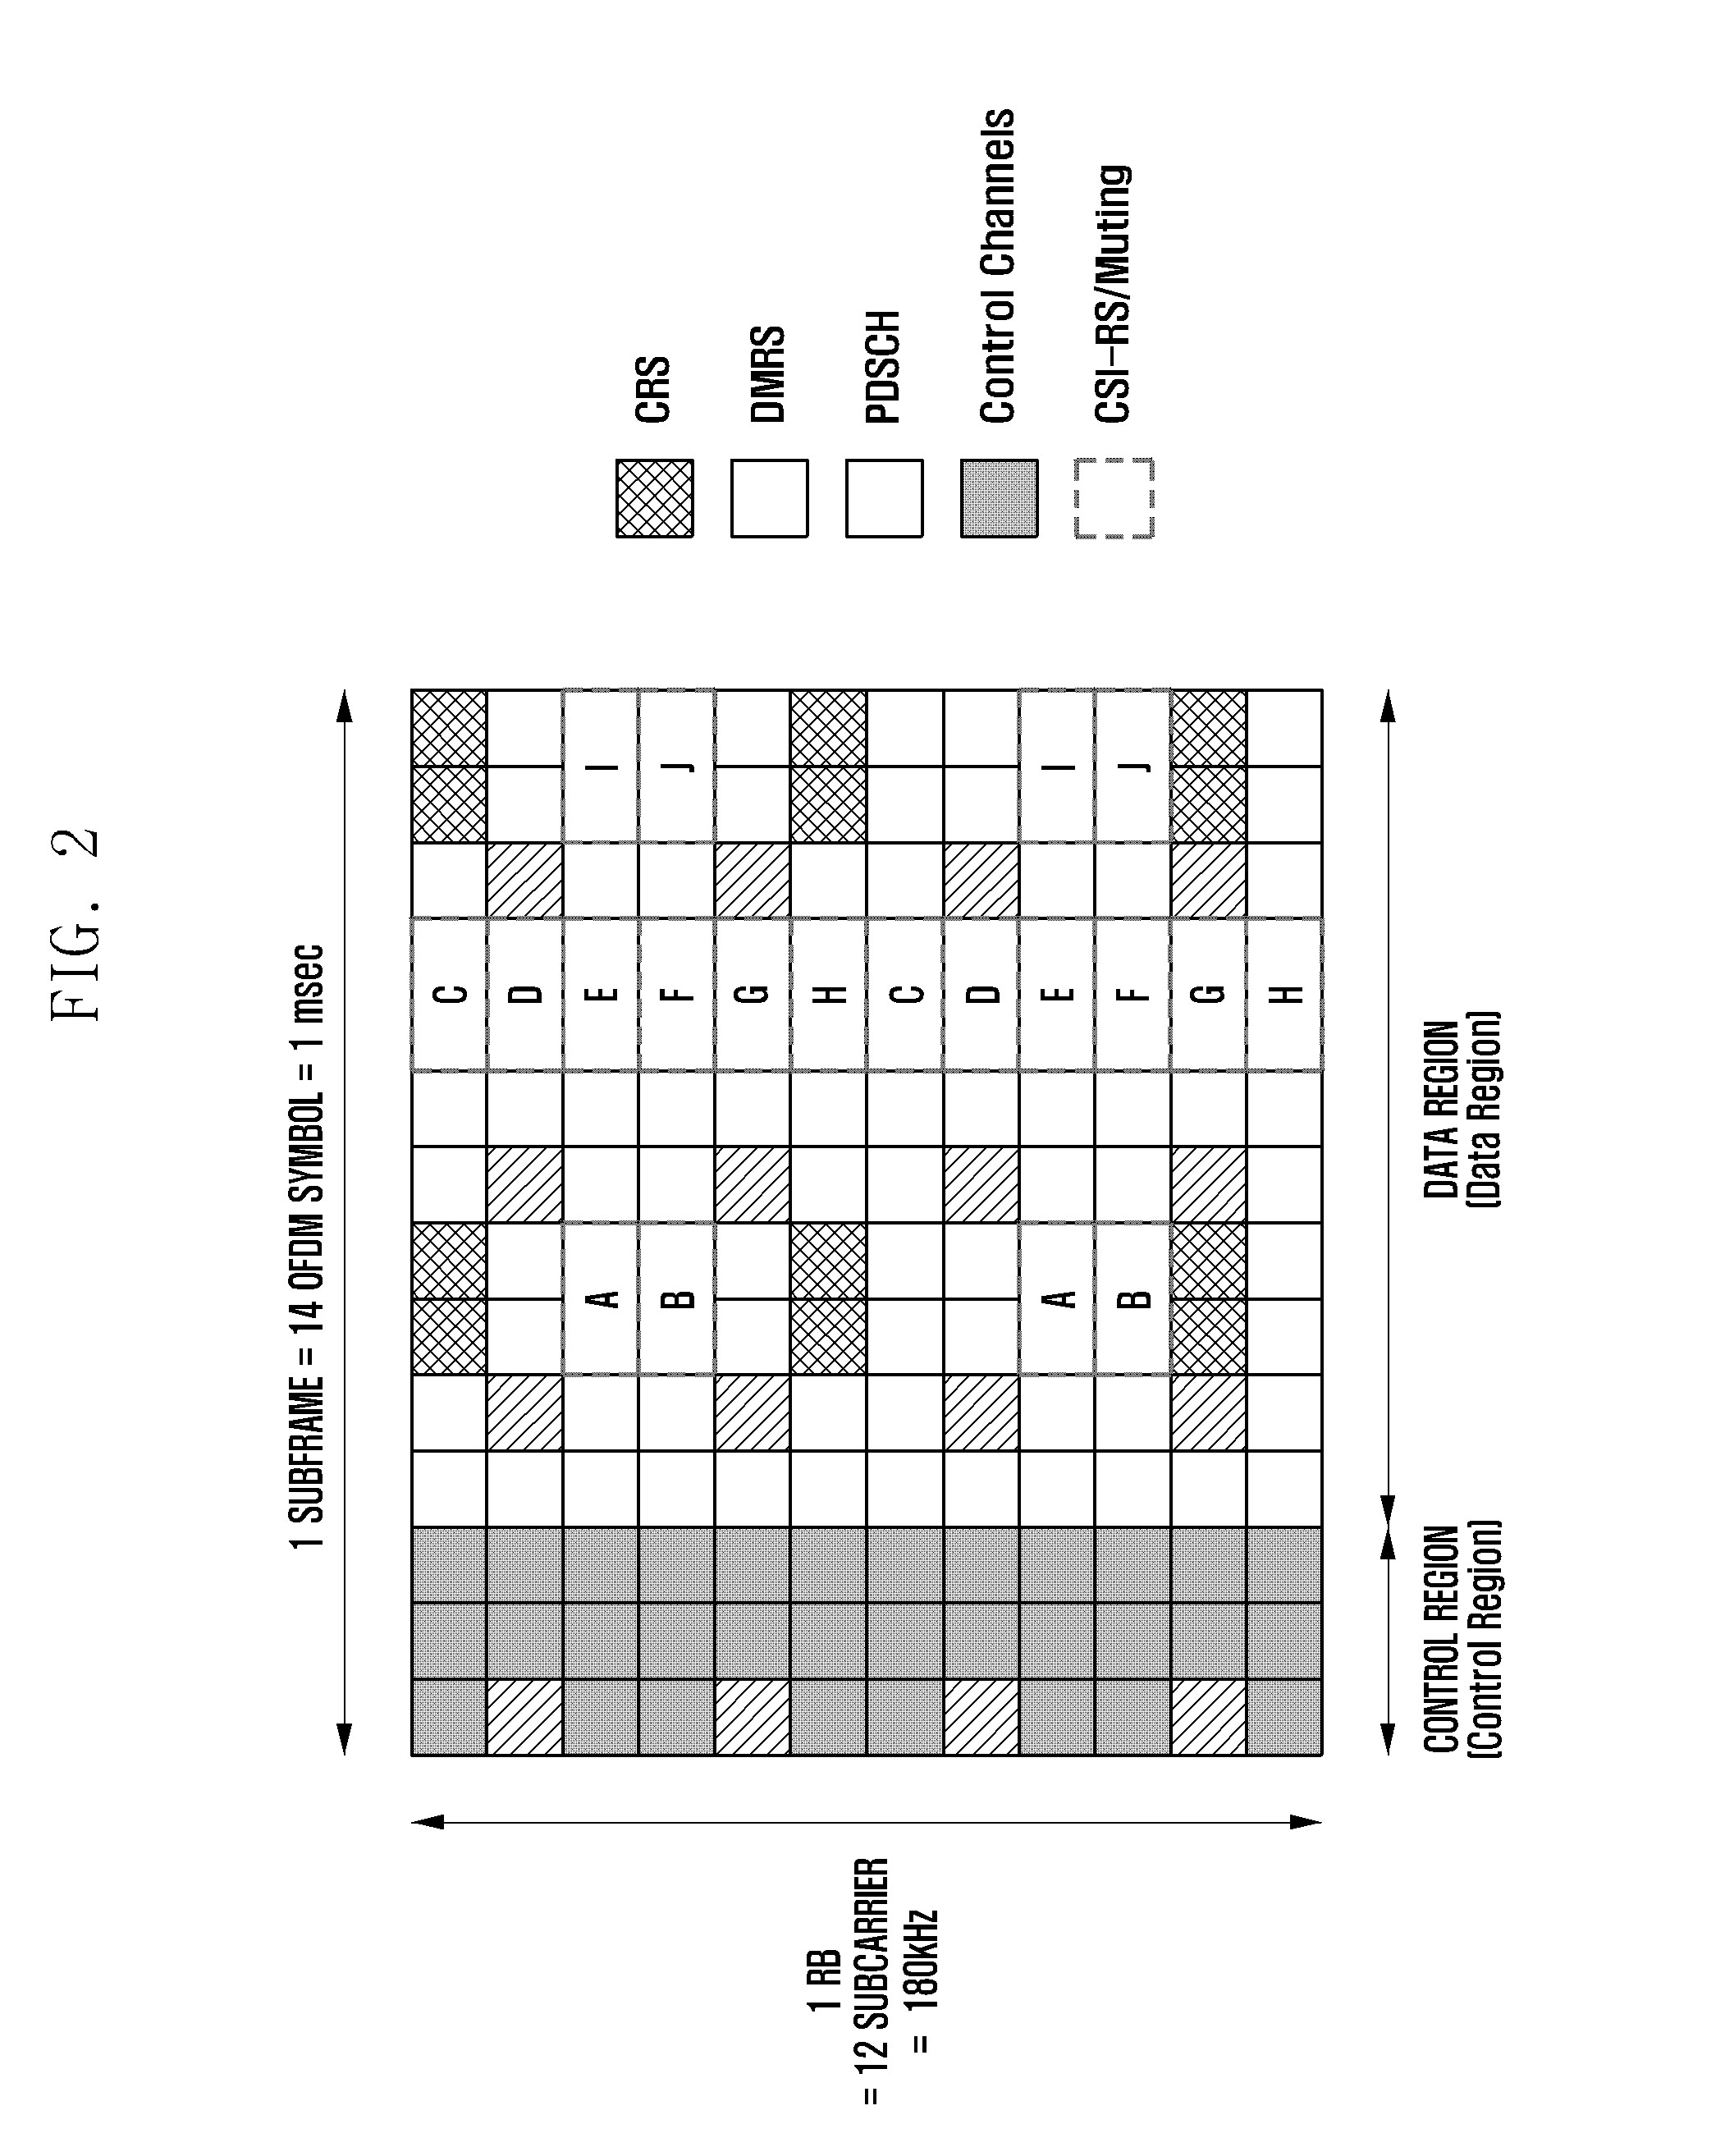 Interference measurement method and apparatus for use in distributed antenna system